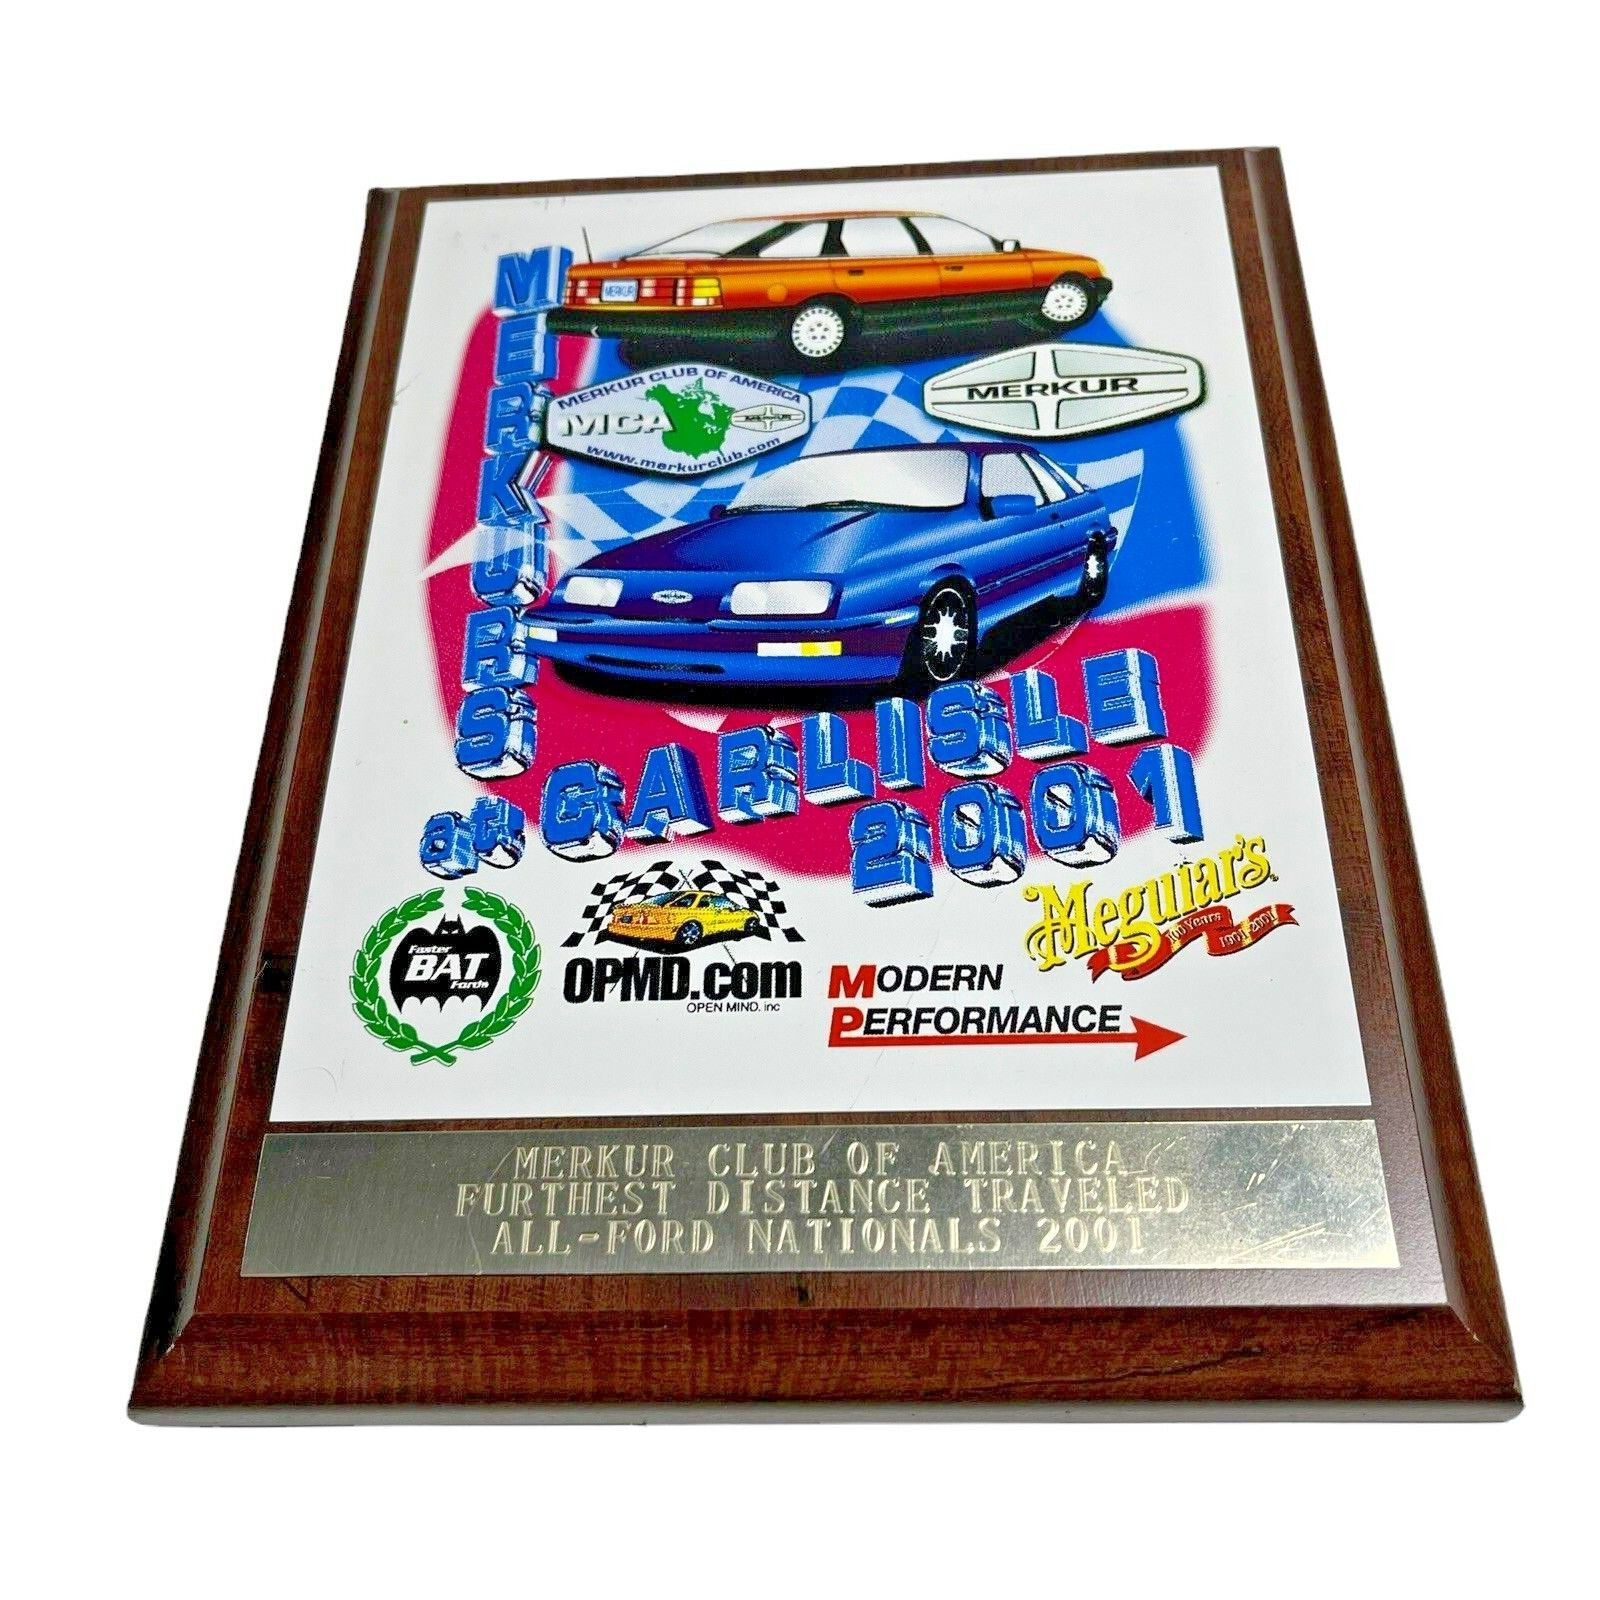 Vintage Merkur Club at Carlisle PA. 2001 ALL FORD NATIONALS Plaque Trophy 